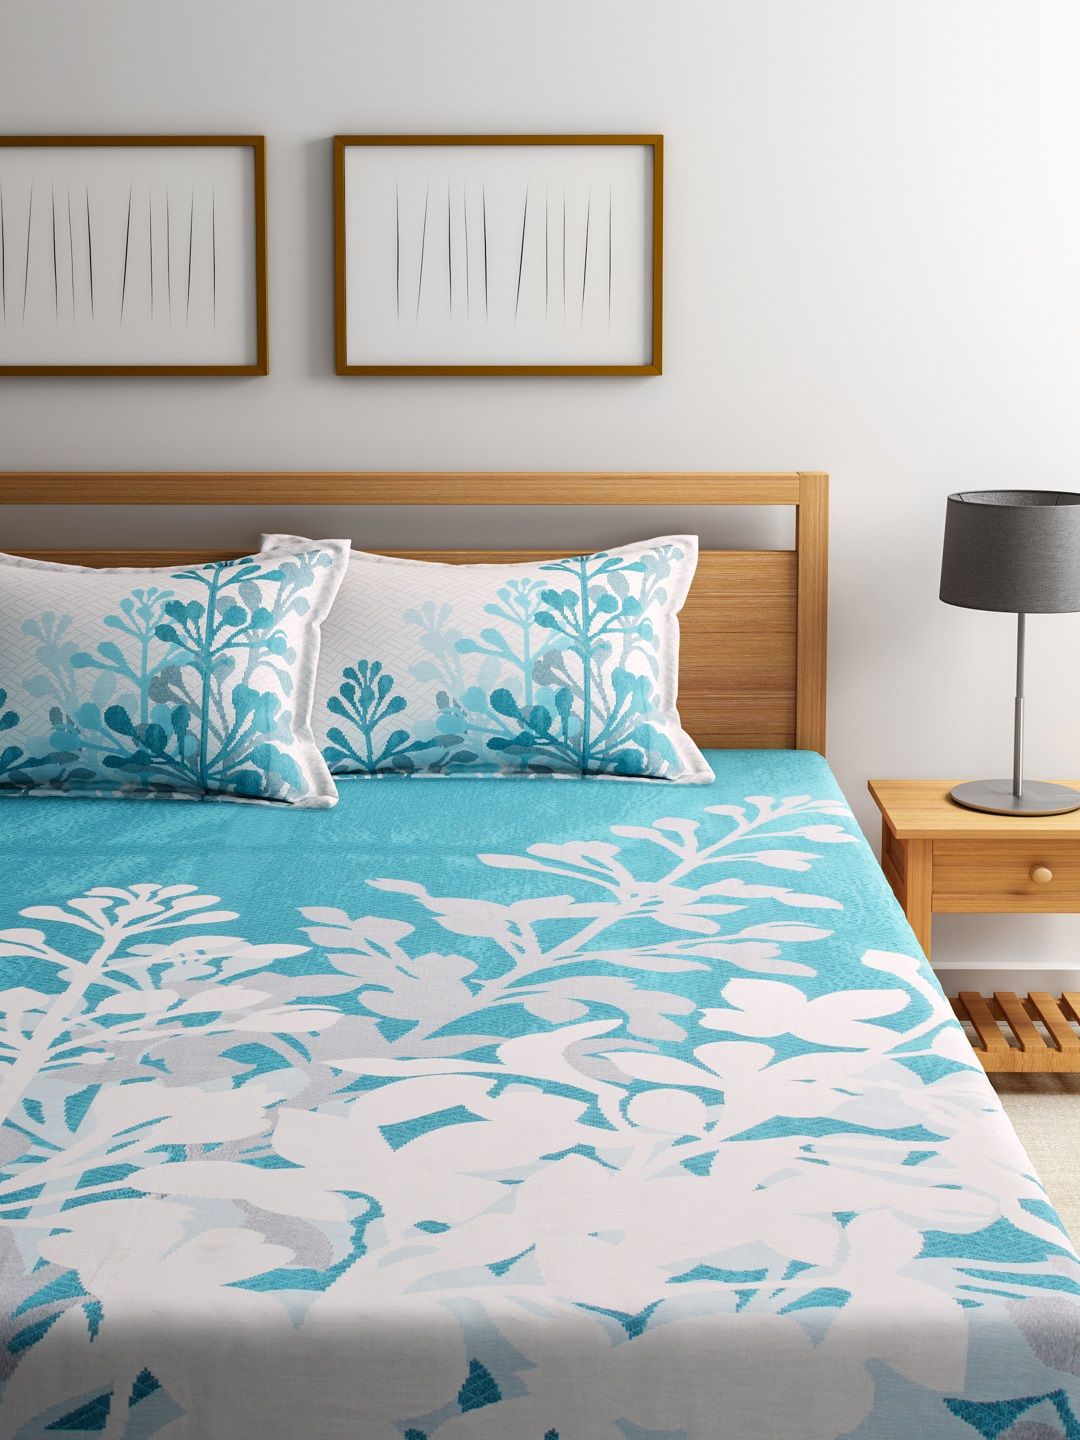 ROMEE Turquoise Blue Floral Polycotton Double Bed Cover with 2 Pillow Covers Price in India